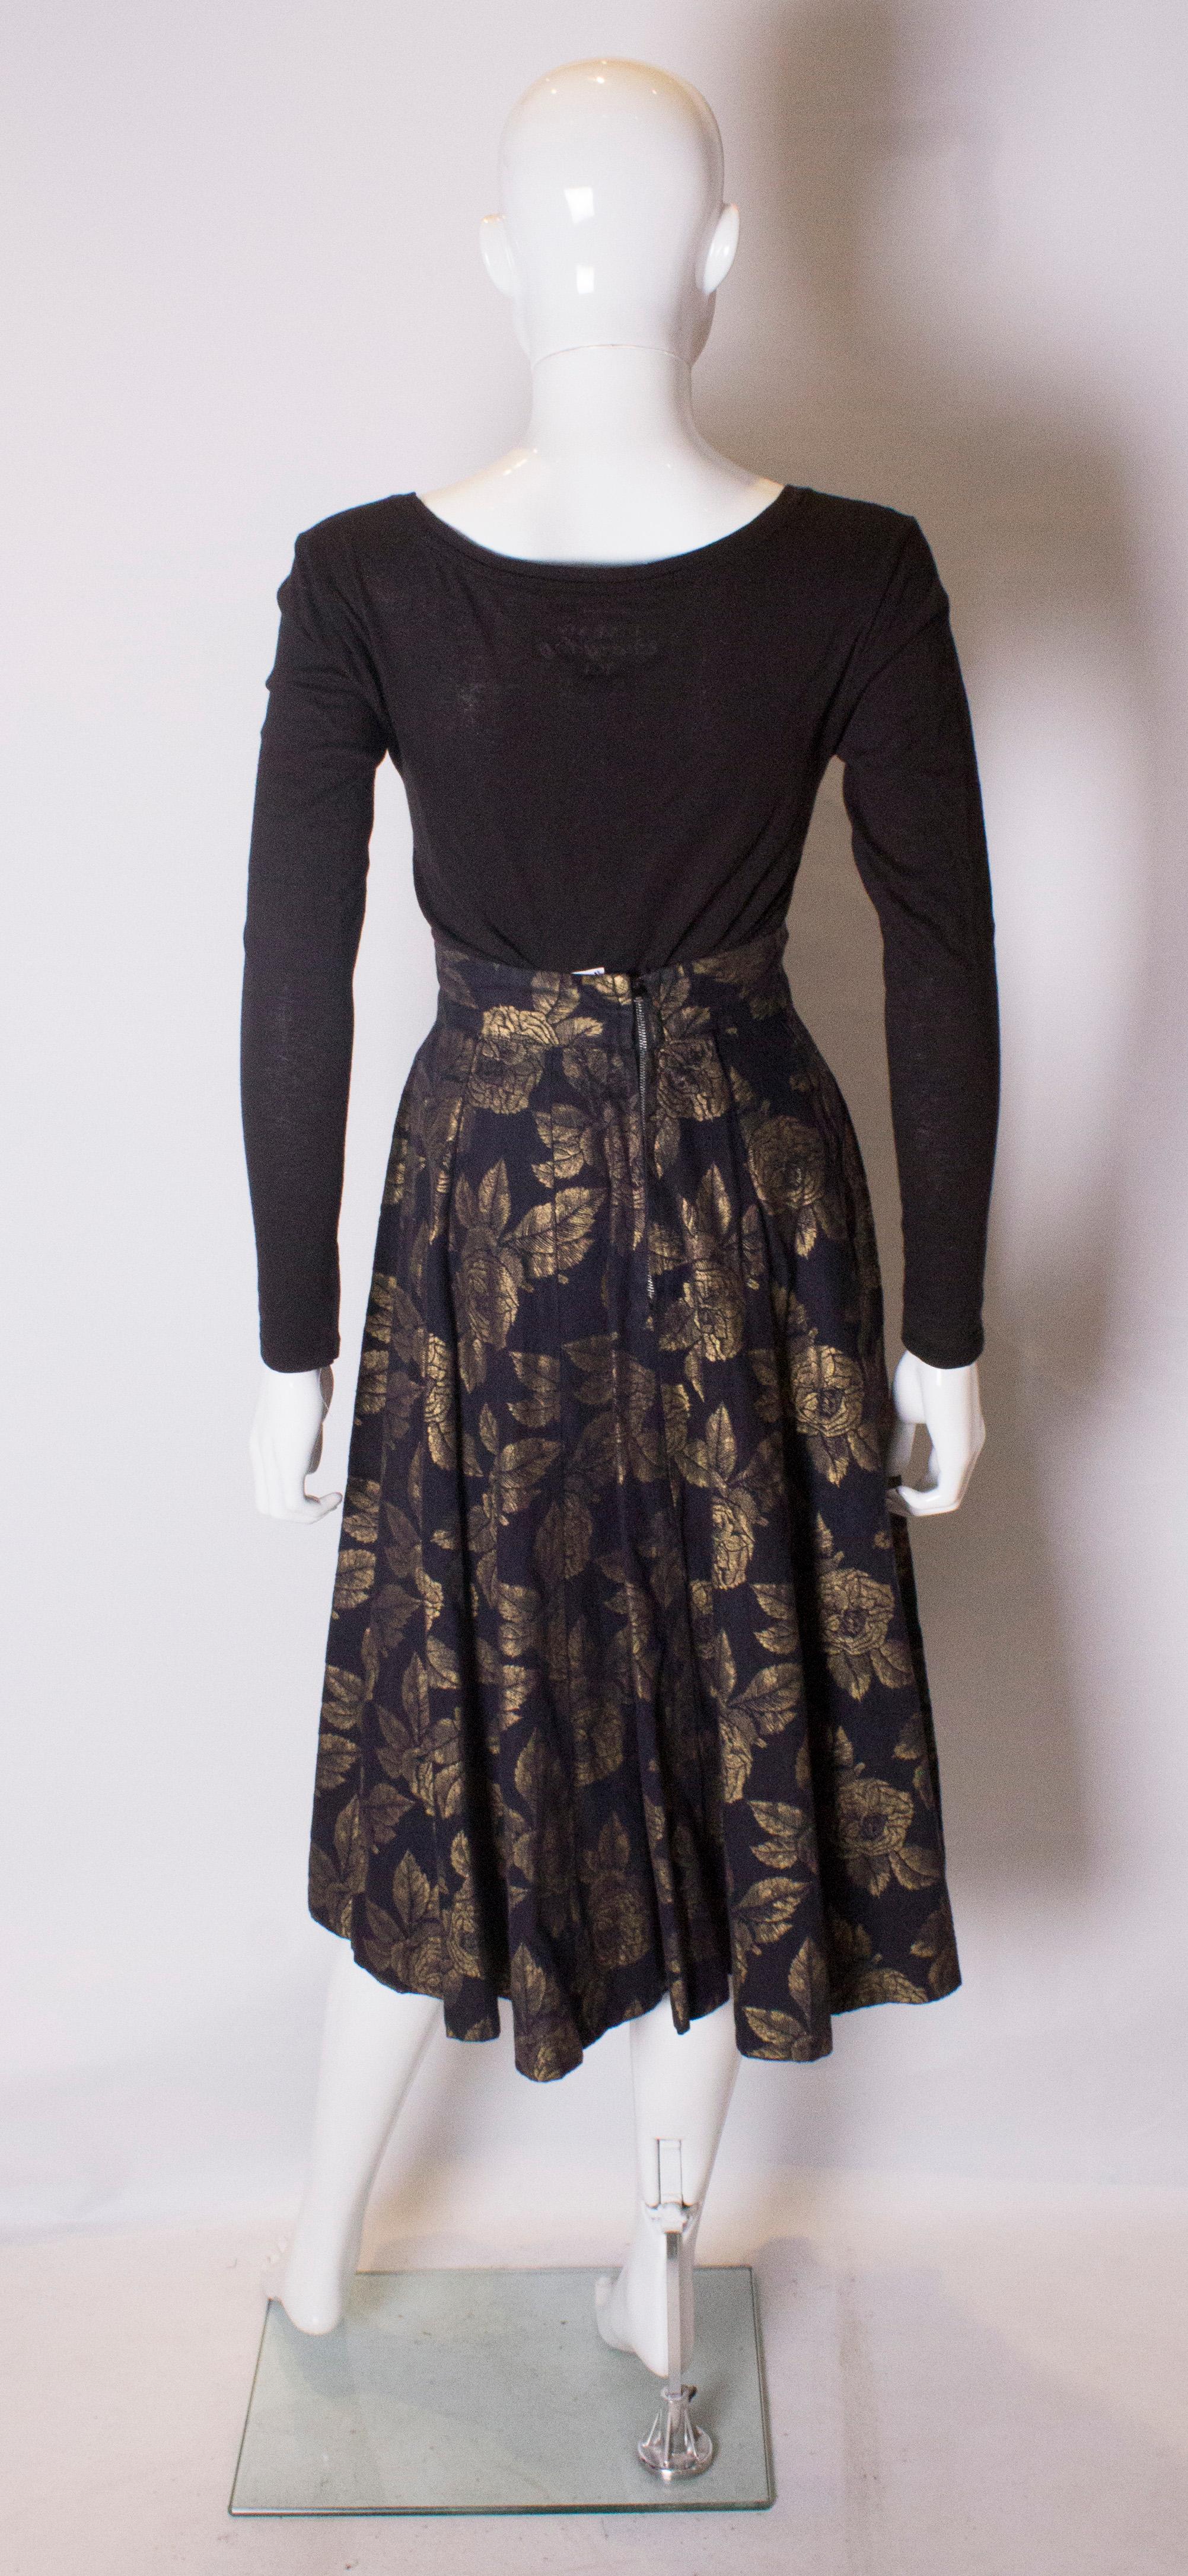 Women's Vintage Black and Gold Skirt with Floral Design For Sale